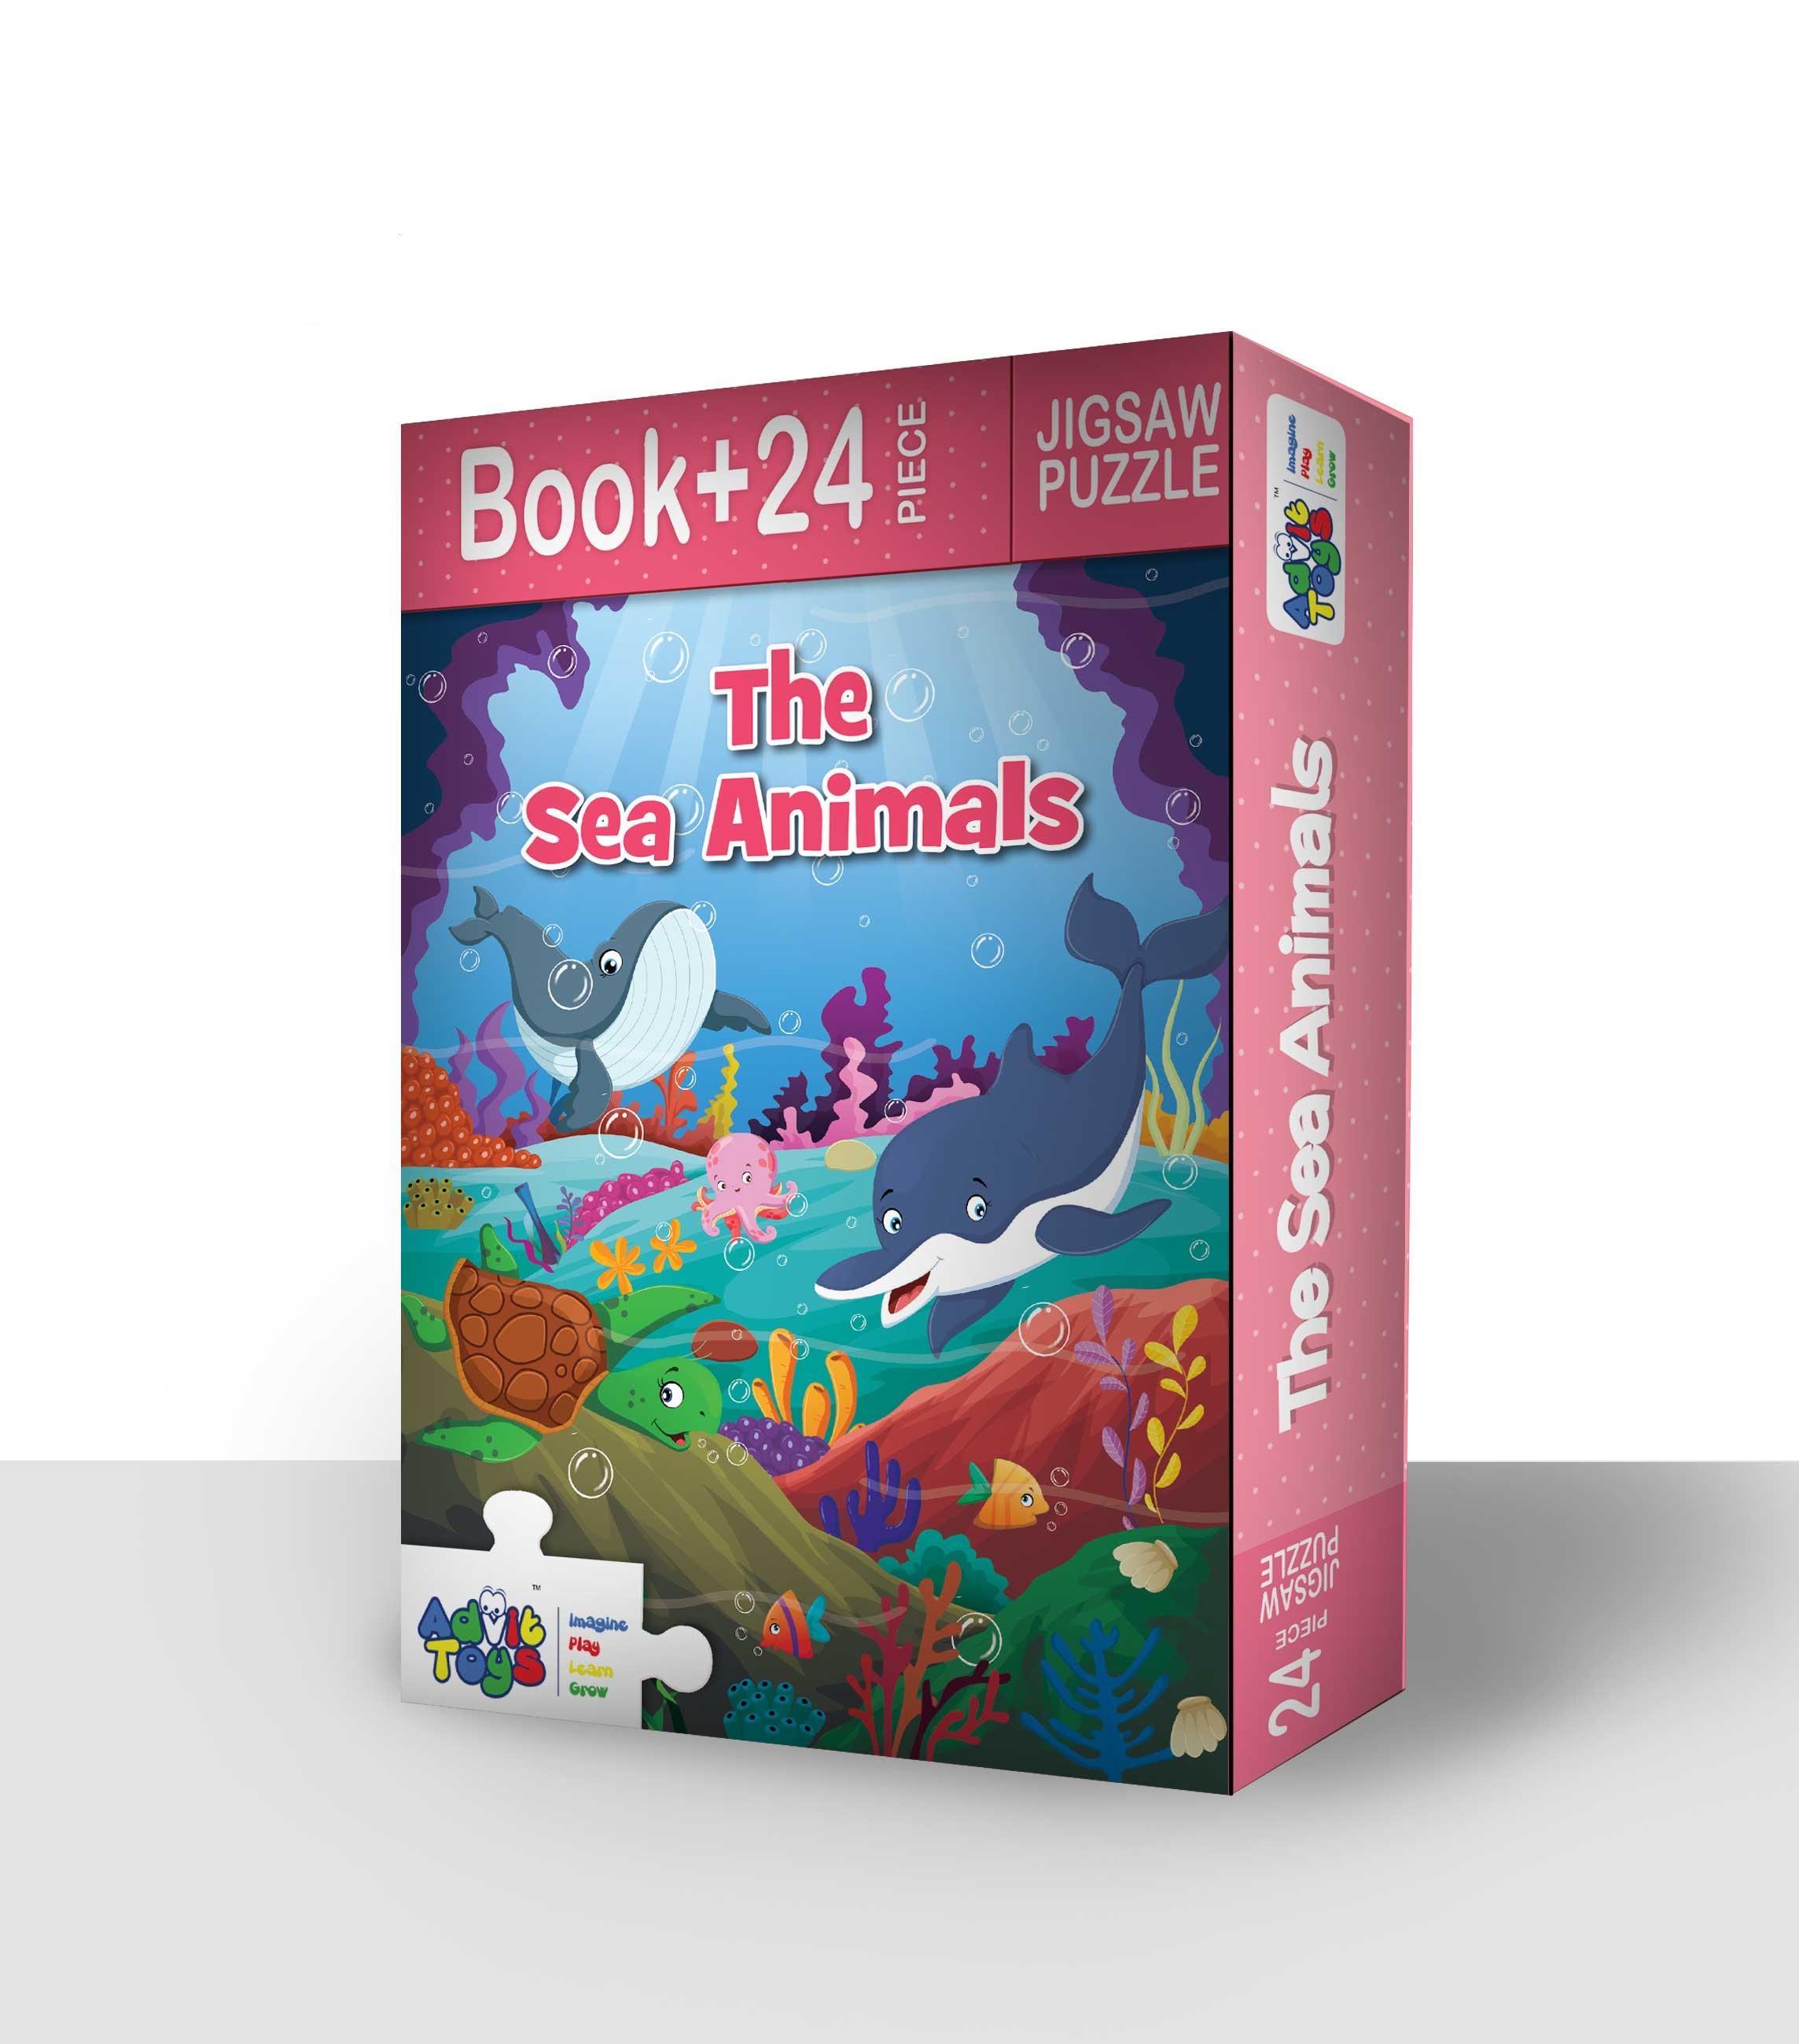 THE SEA ANIMALS JIGSAW PUZZLE (24 PIECE + BOOK INSIDE)